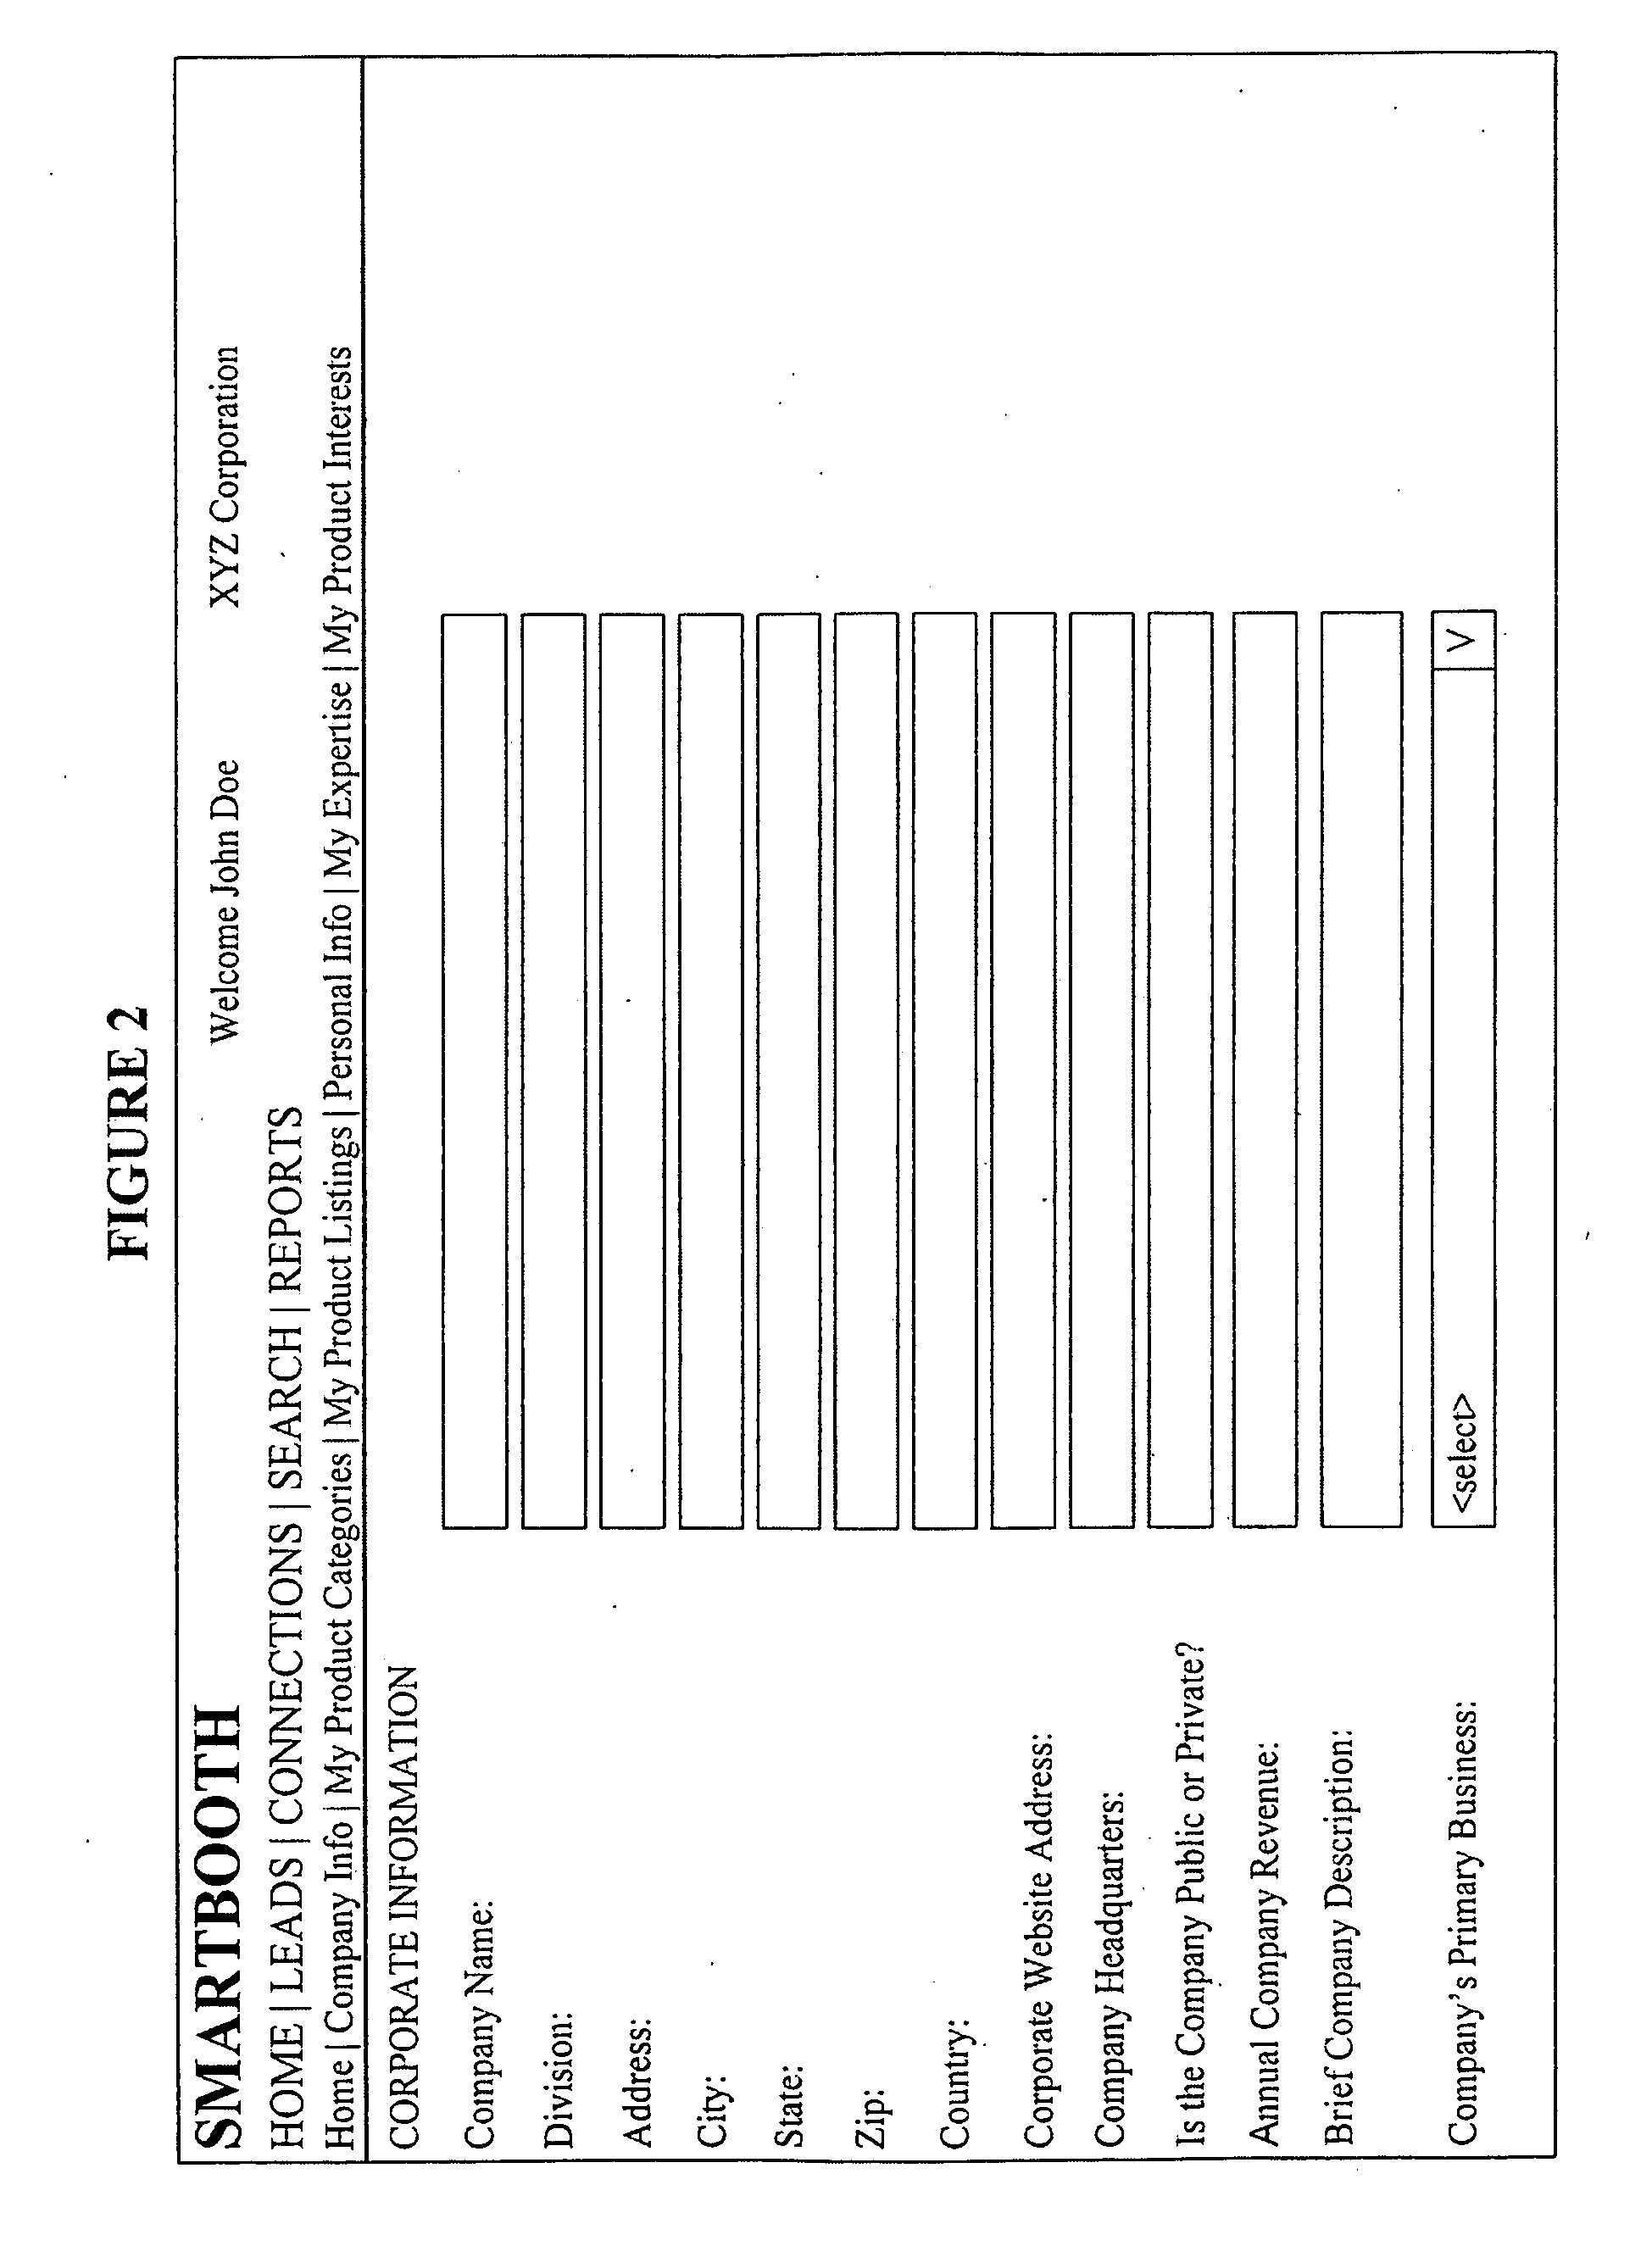 Method and system for determining relevant matches based on attributes